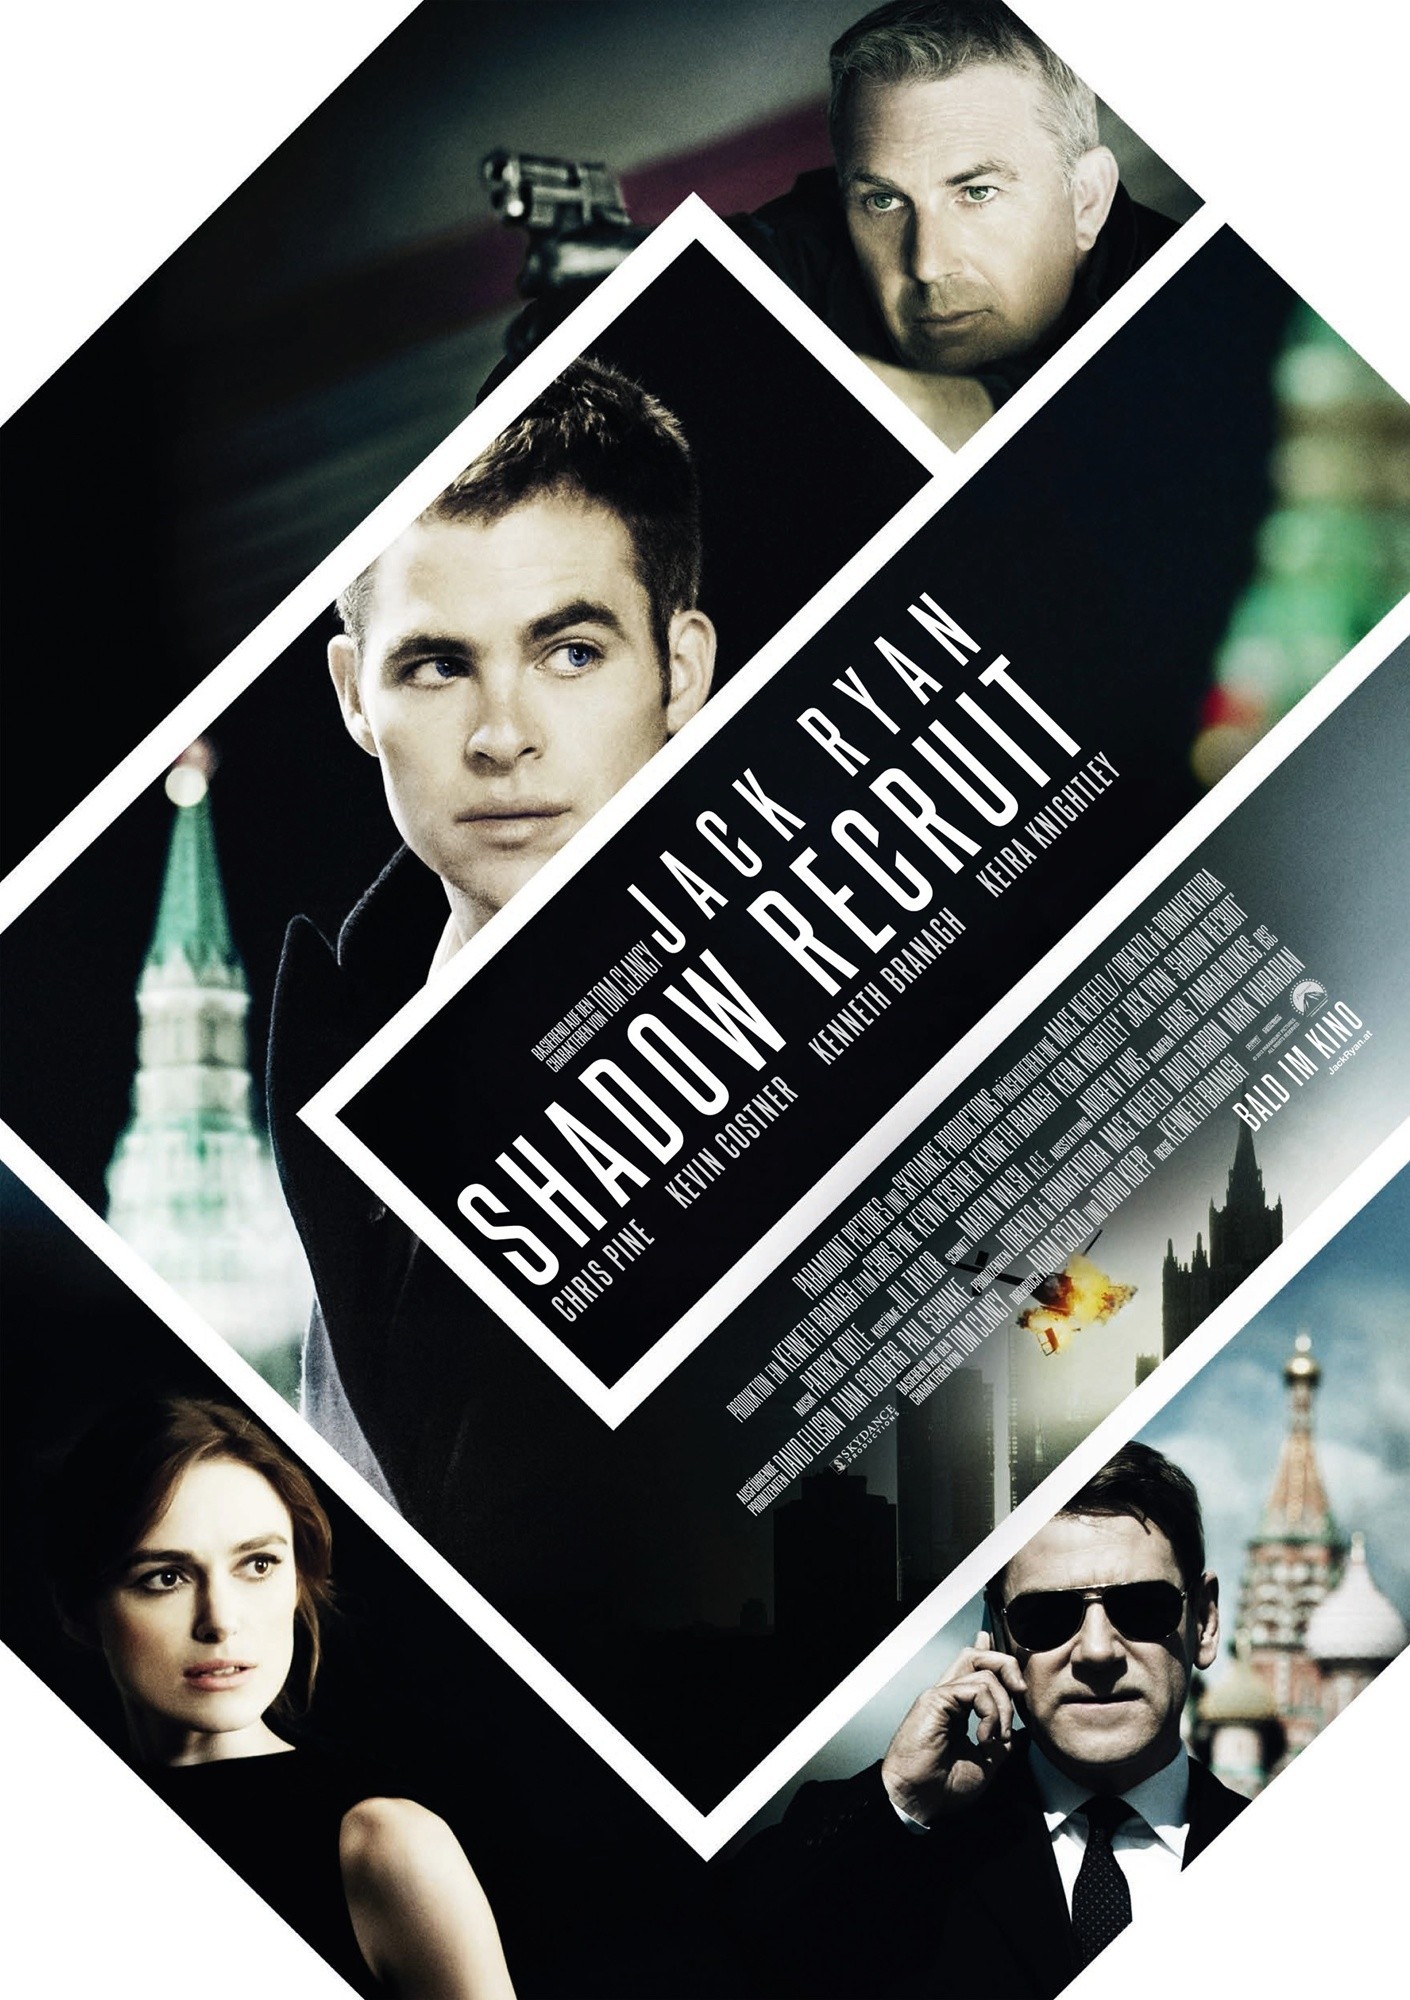 Poster of Paramount Pictures' Jack Ryan: Shadow Recruit (2014)